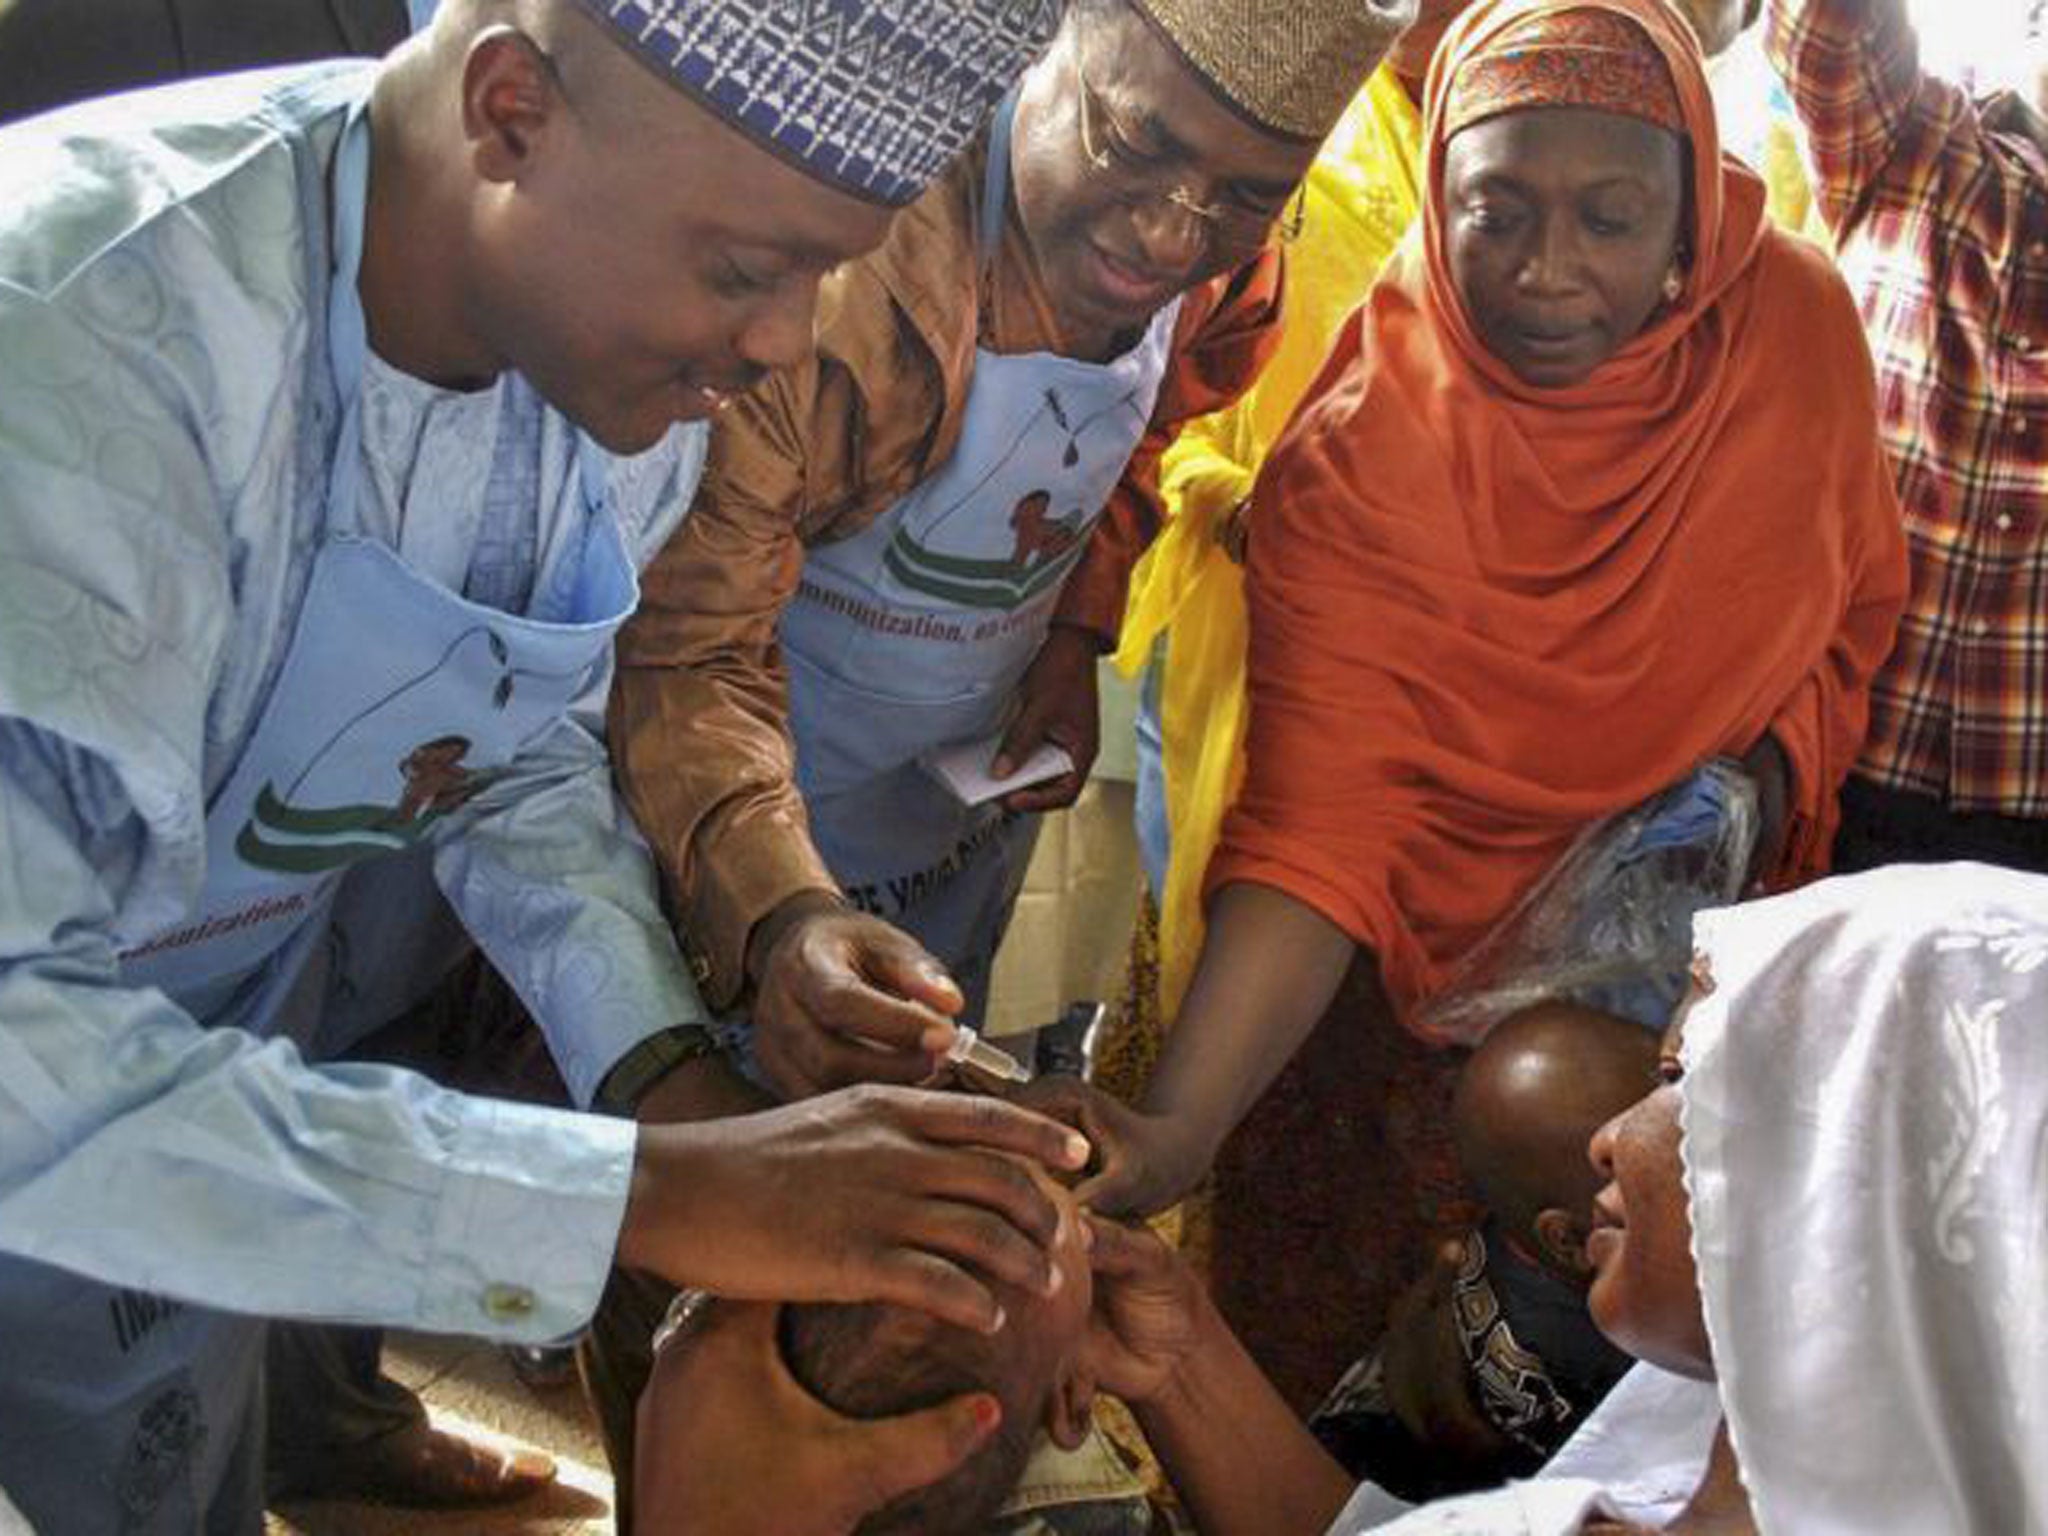 A Nigerian child is given the polio vaccine. According to police reports clinics administering the vaccine have been targetted by gunmen thought to be aligned with the Boko Haram sect